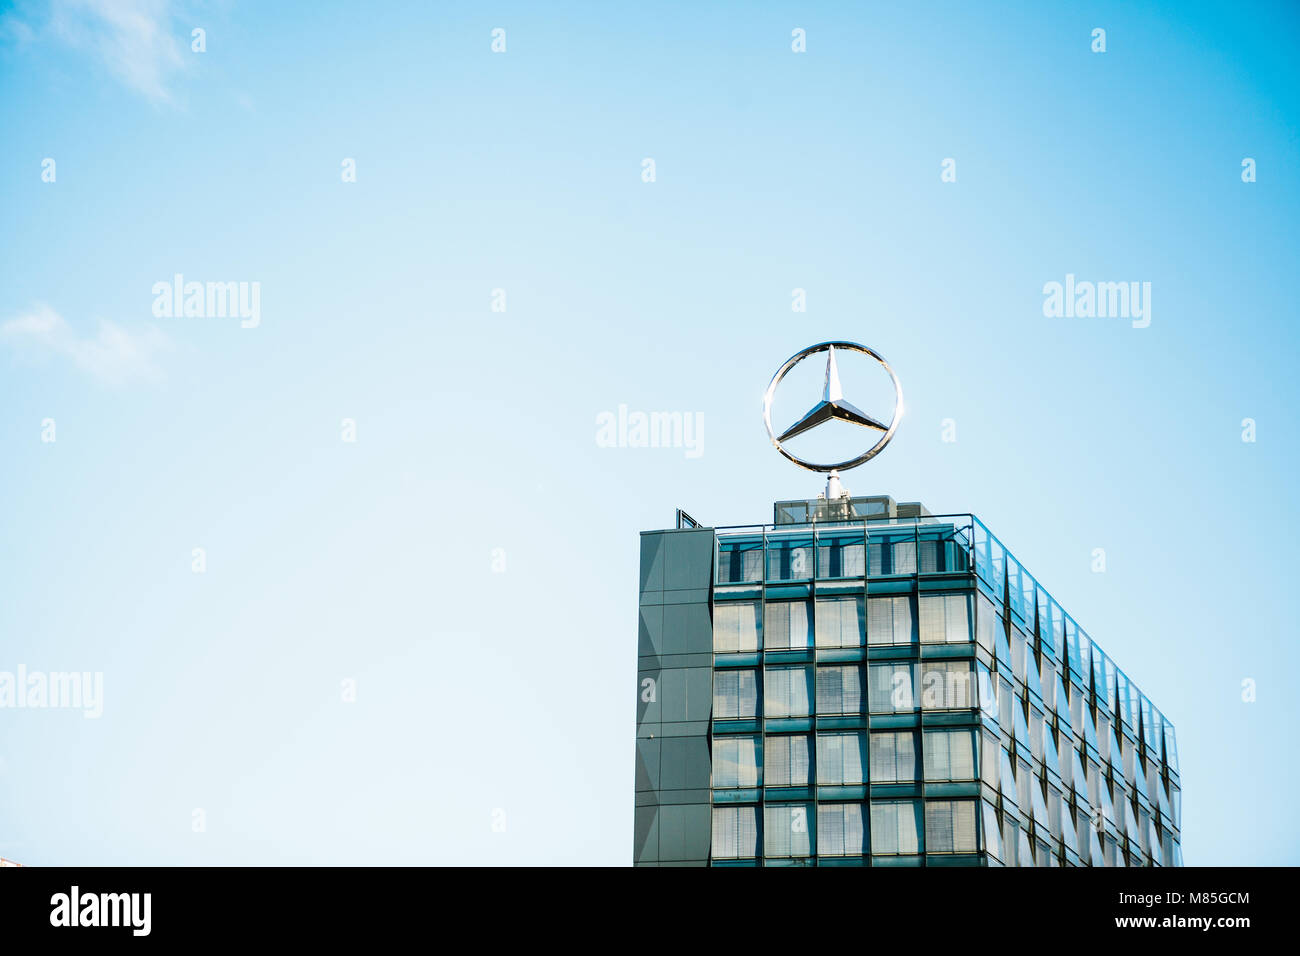 The symbol of Mercedes Benz on the roof of the central office building of the international engineering corporation Mercedes Benz. Stock Photo